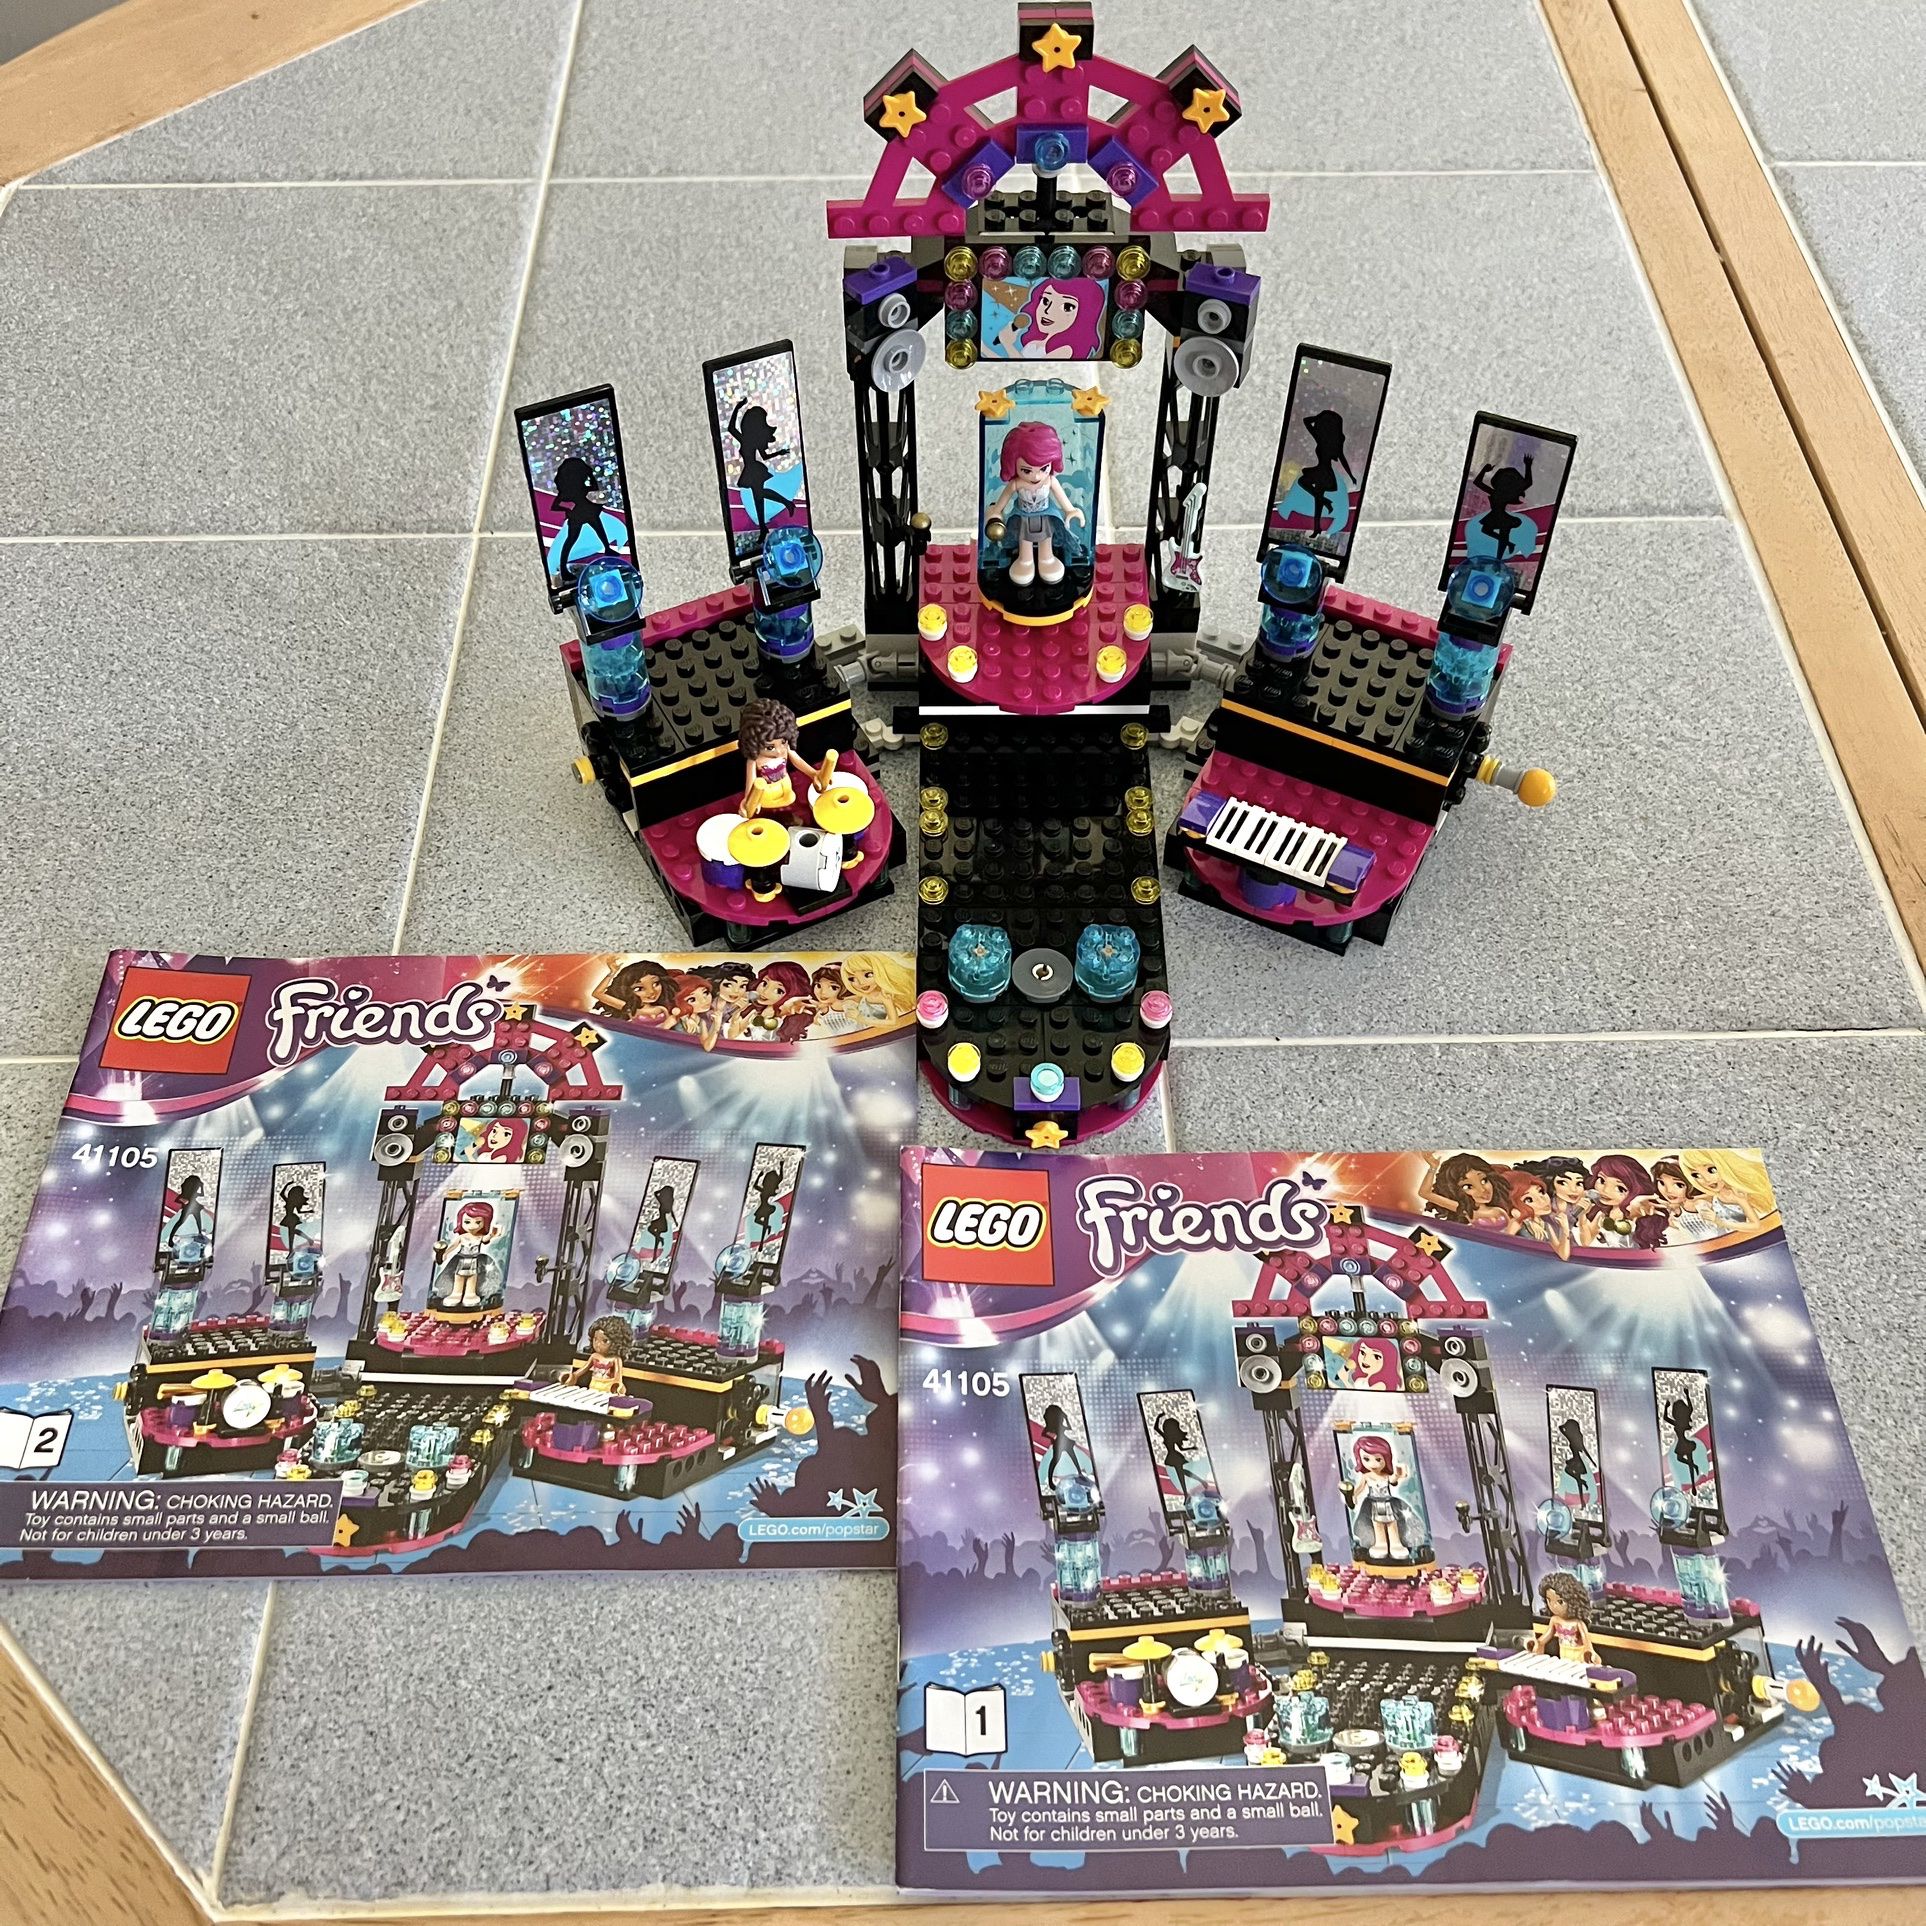 Lederen Necessities Muligt LEGO Friends 41105 Pop Star Show Stage for Sale in Conroe, TX - OfferUp